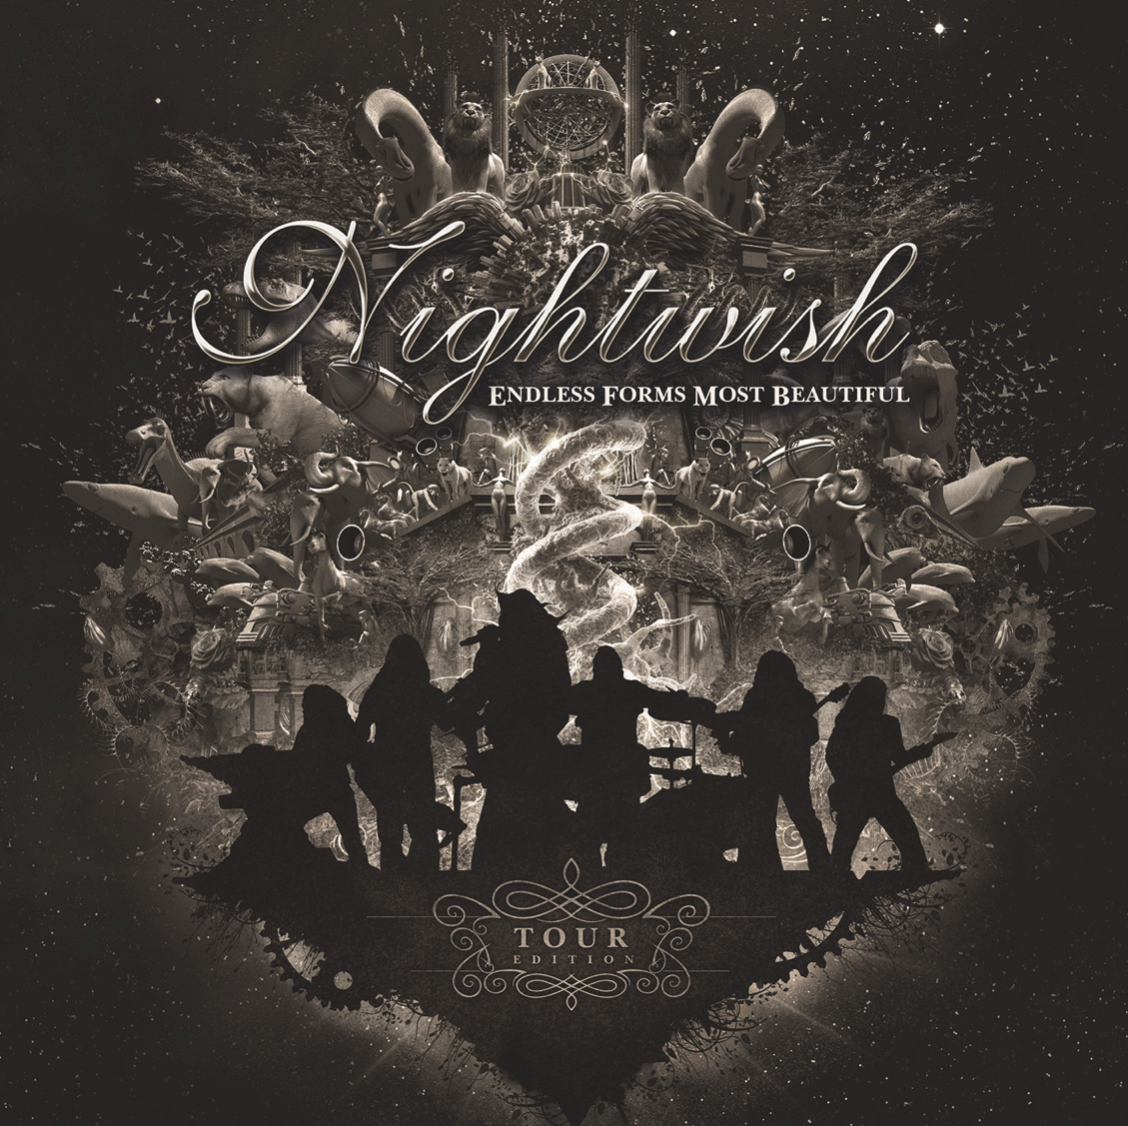 Nightwish - Endless Forms Most Beautiful, tour edition